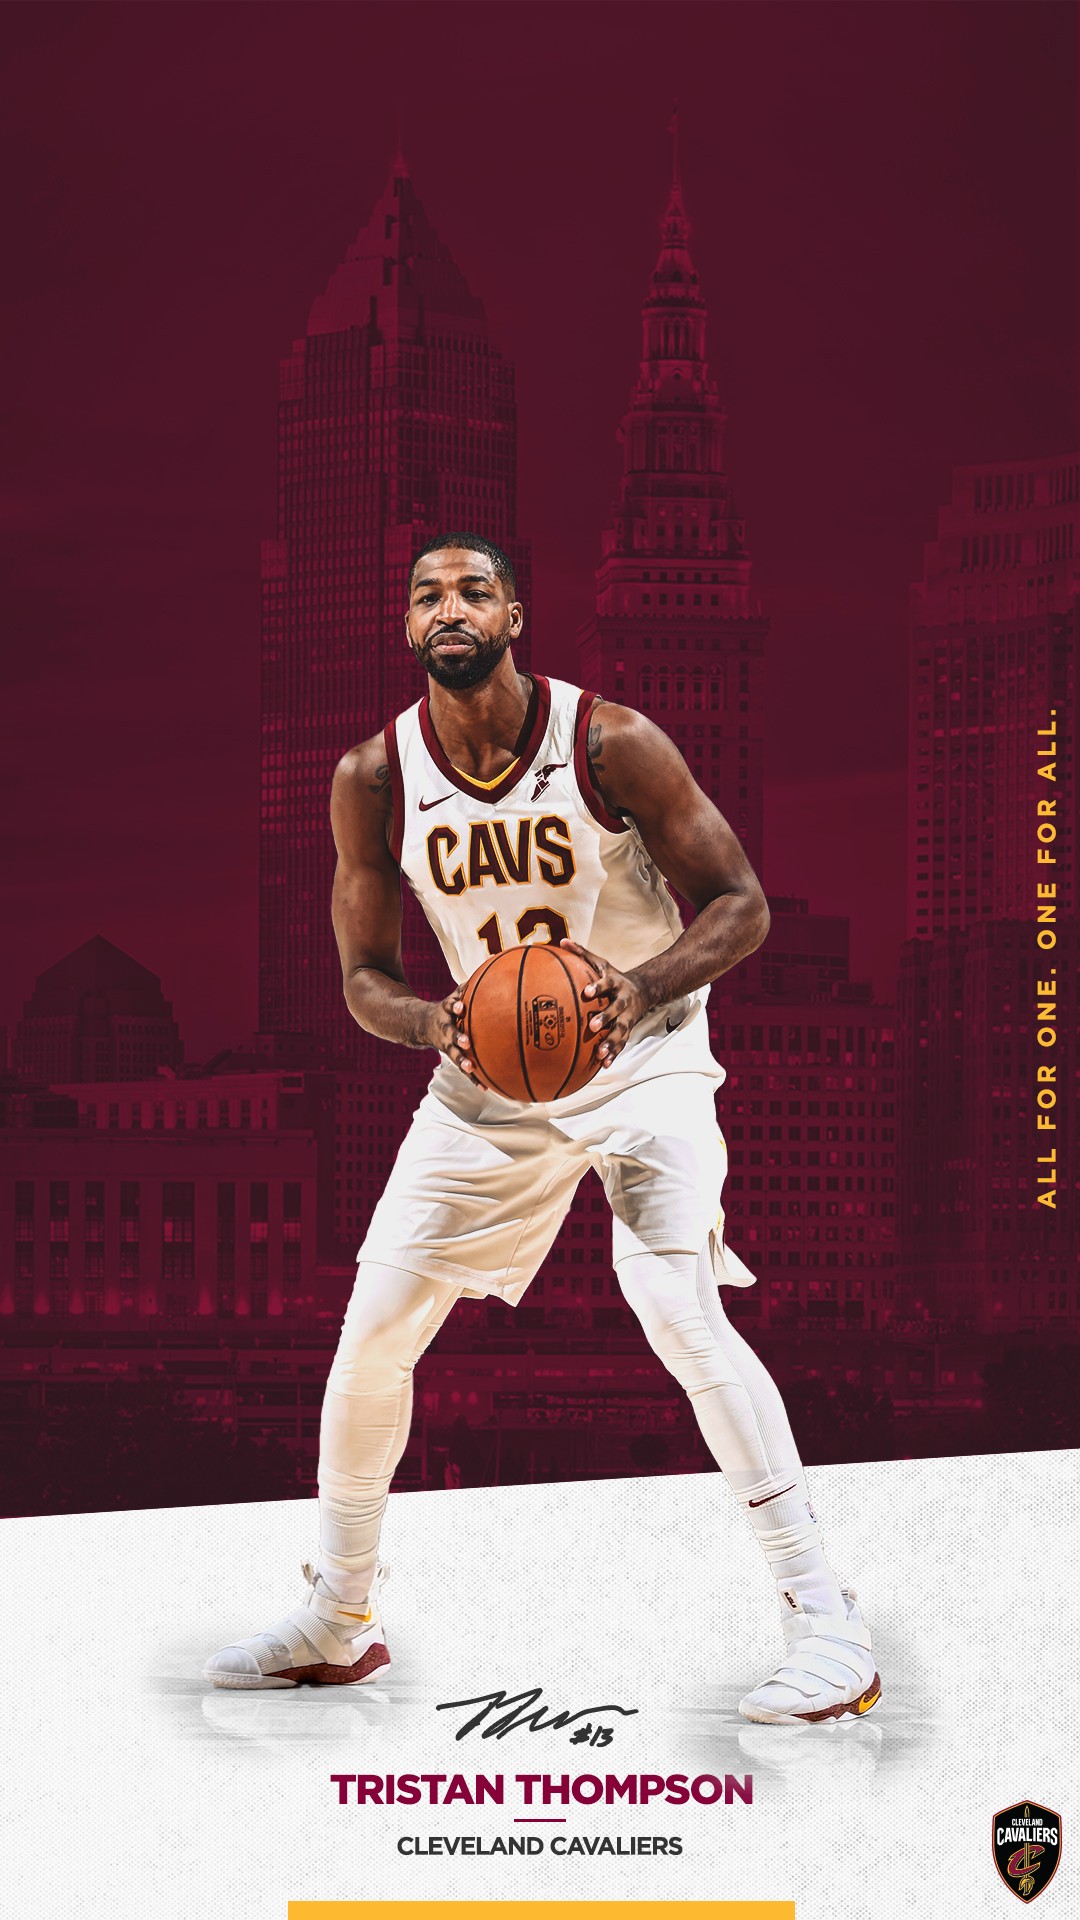 Tristan Thompson Mobile Wallpaper With Resolution 1080X1920